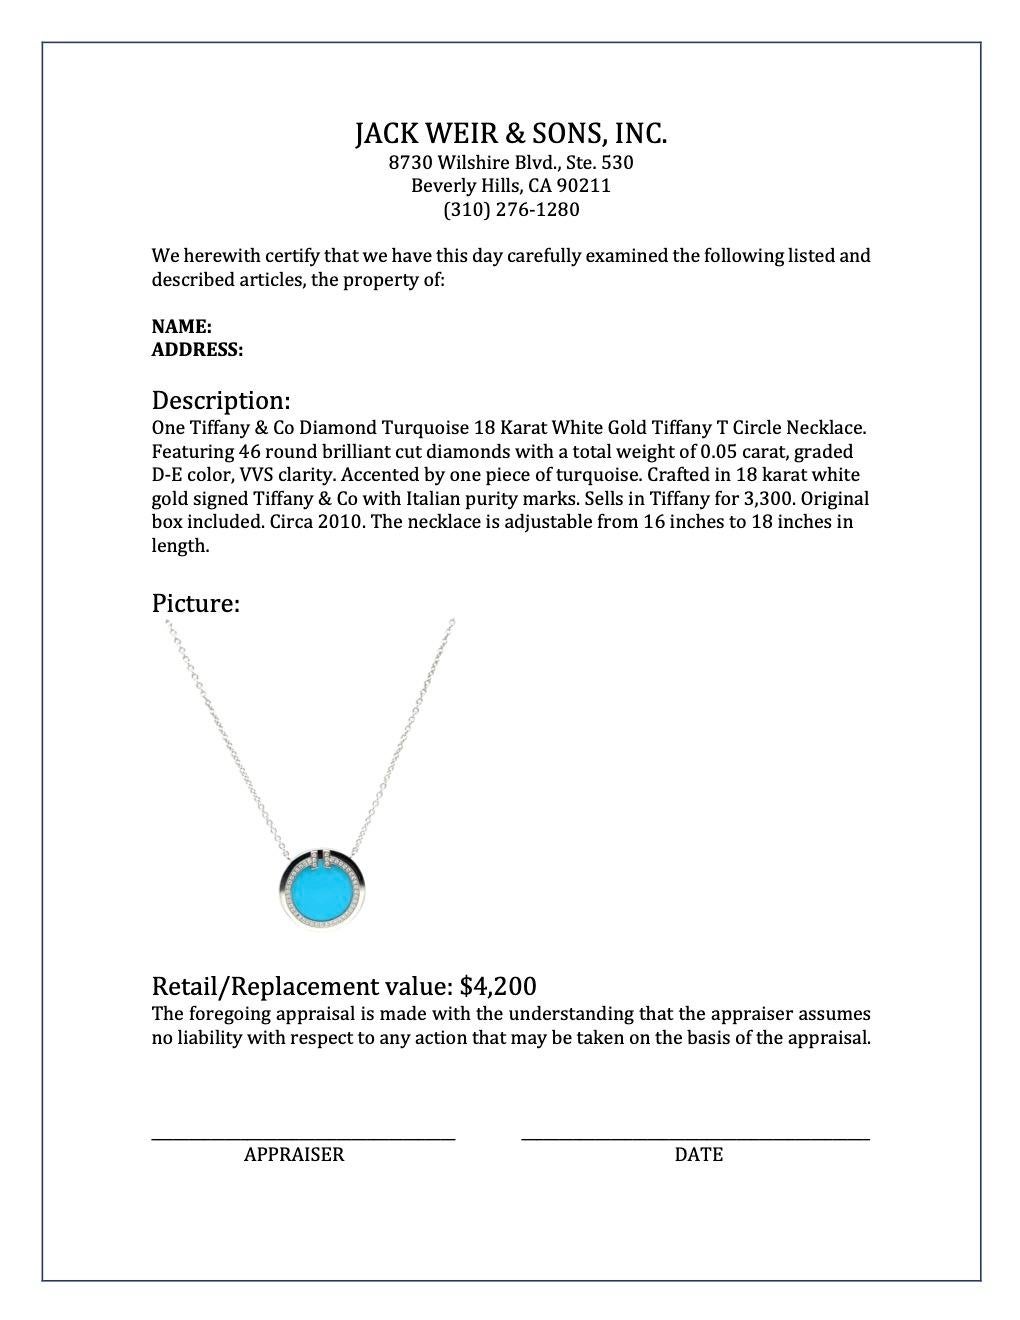 Tiffany & Co Diamond Turquoise 18 Karat White Gold Tiffany T Circle Necklace In Excellent Condition In Beverly Hills, CA